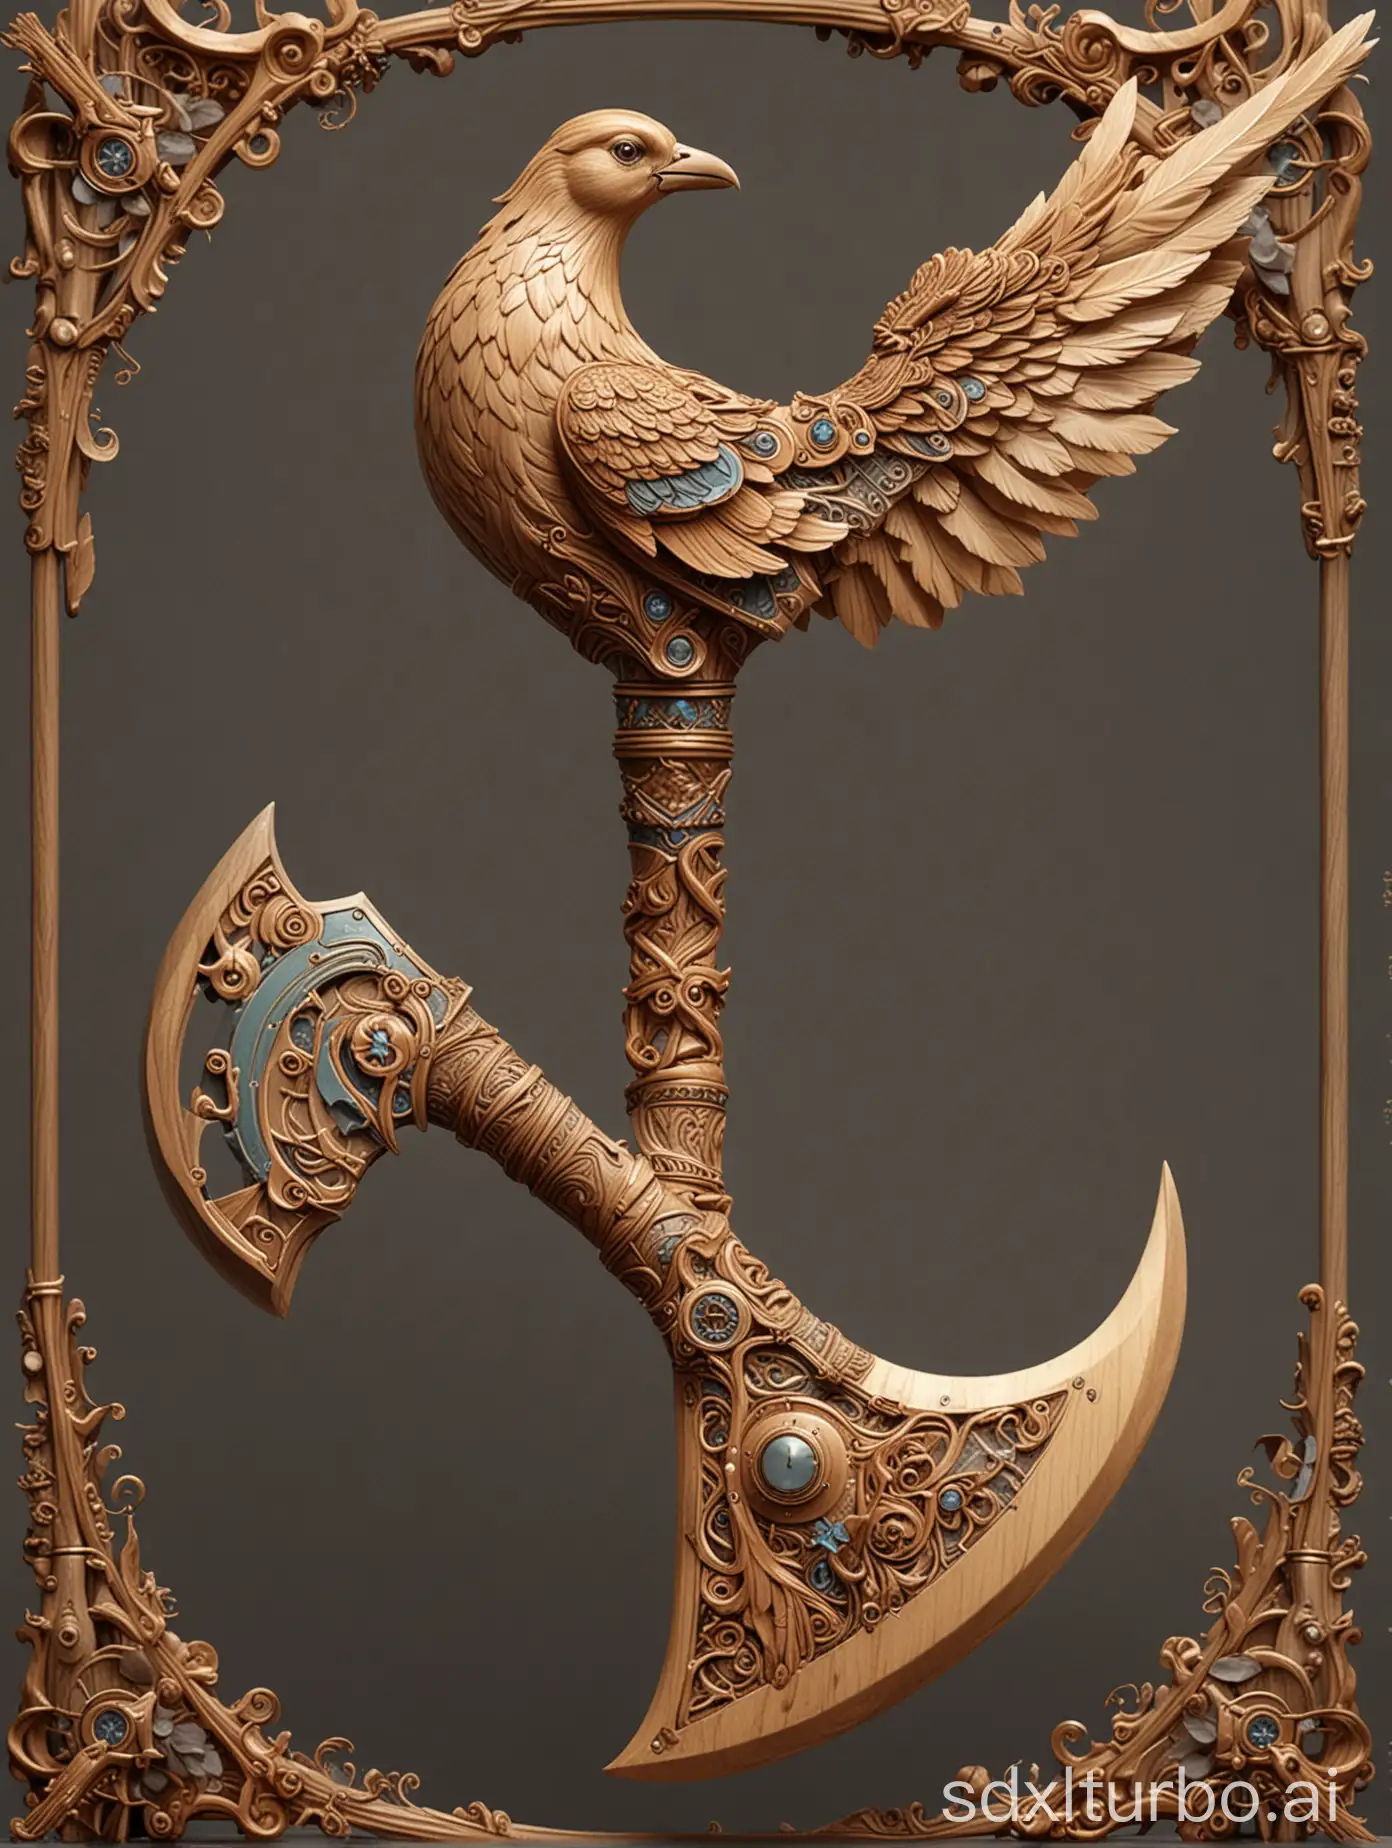 Futuristic-BirdShaped-Magical-Axe-with-Traditional-Wooden-Time-Elements